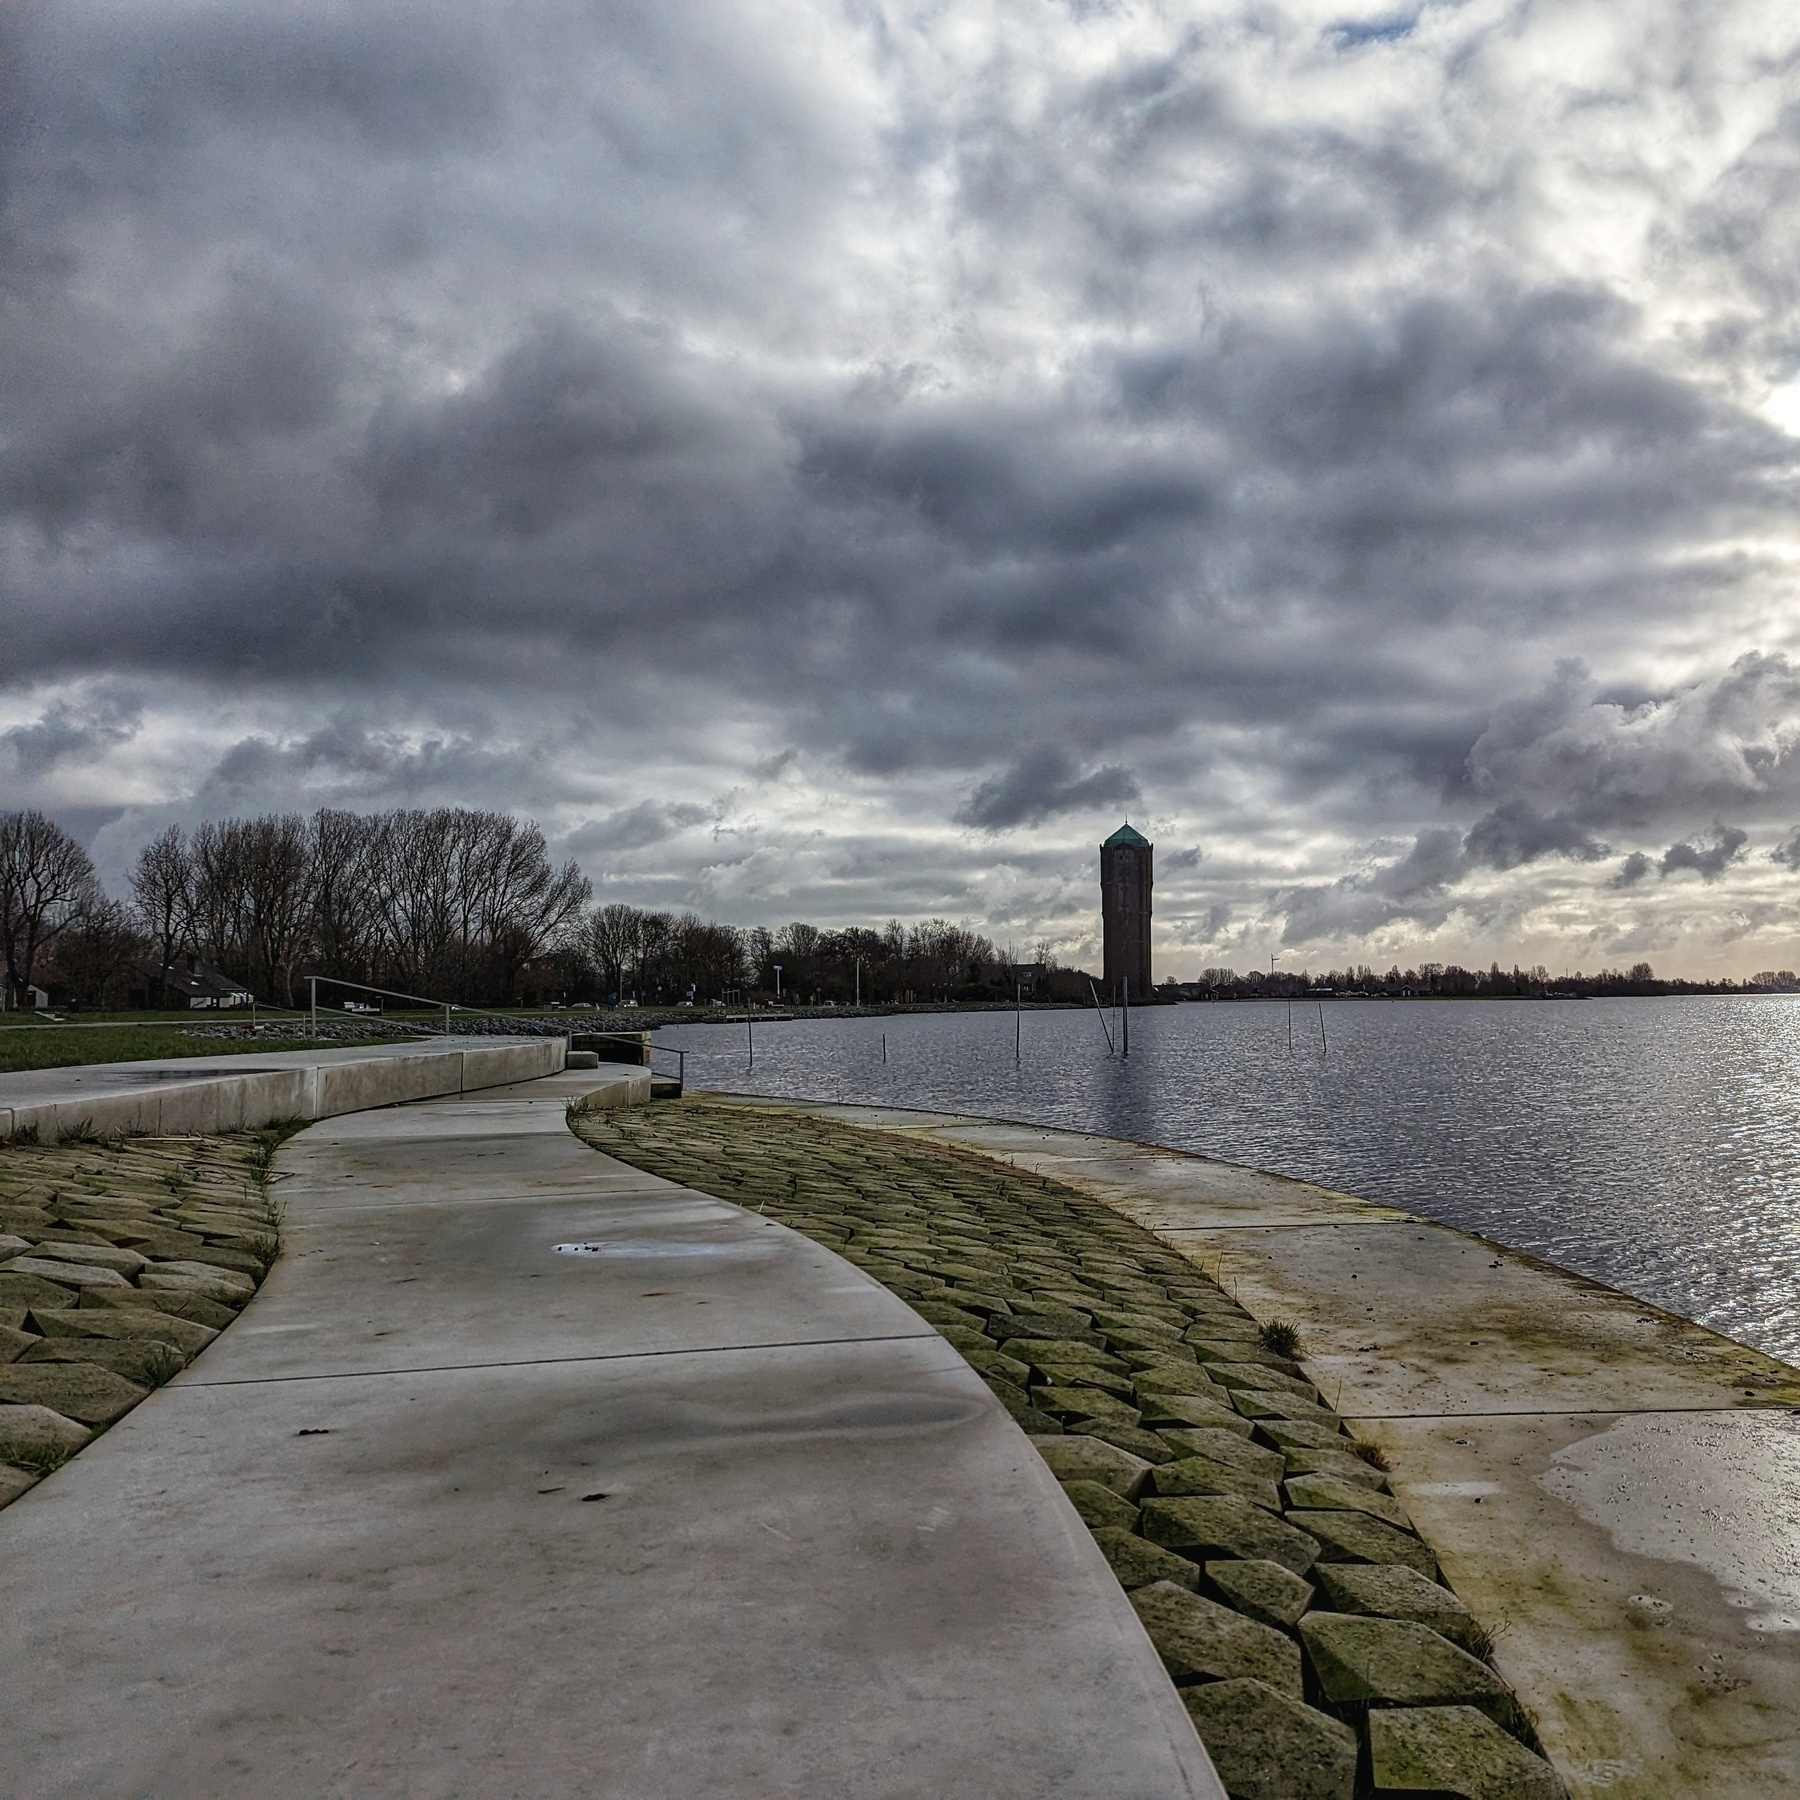 In the distance, an old brick tower looks out over a lake. In the foreground, concrete and stone steps lead down to the lake.